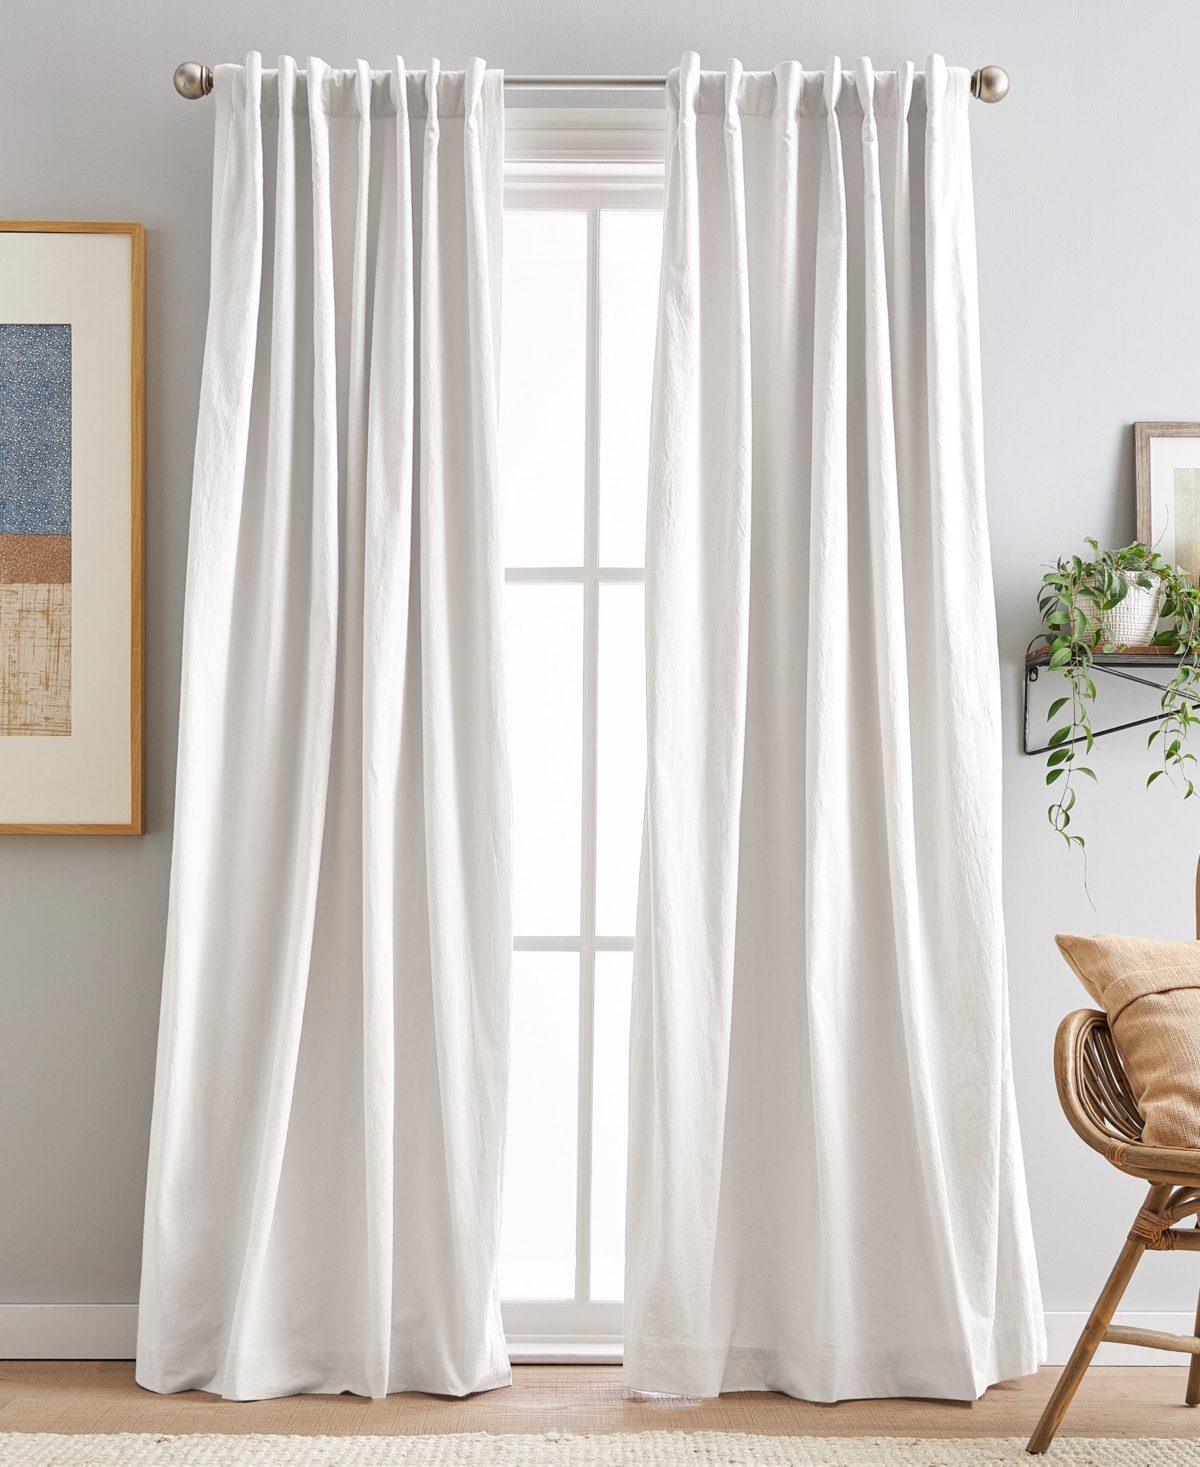 Peri Home Sanctuary Back Tab Lined 2-piece Curtain Panel Set, 50" X 108" In White